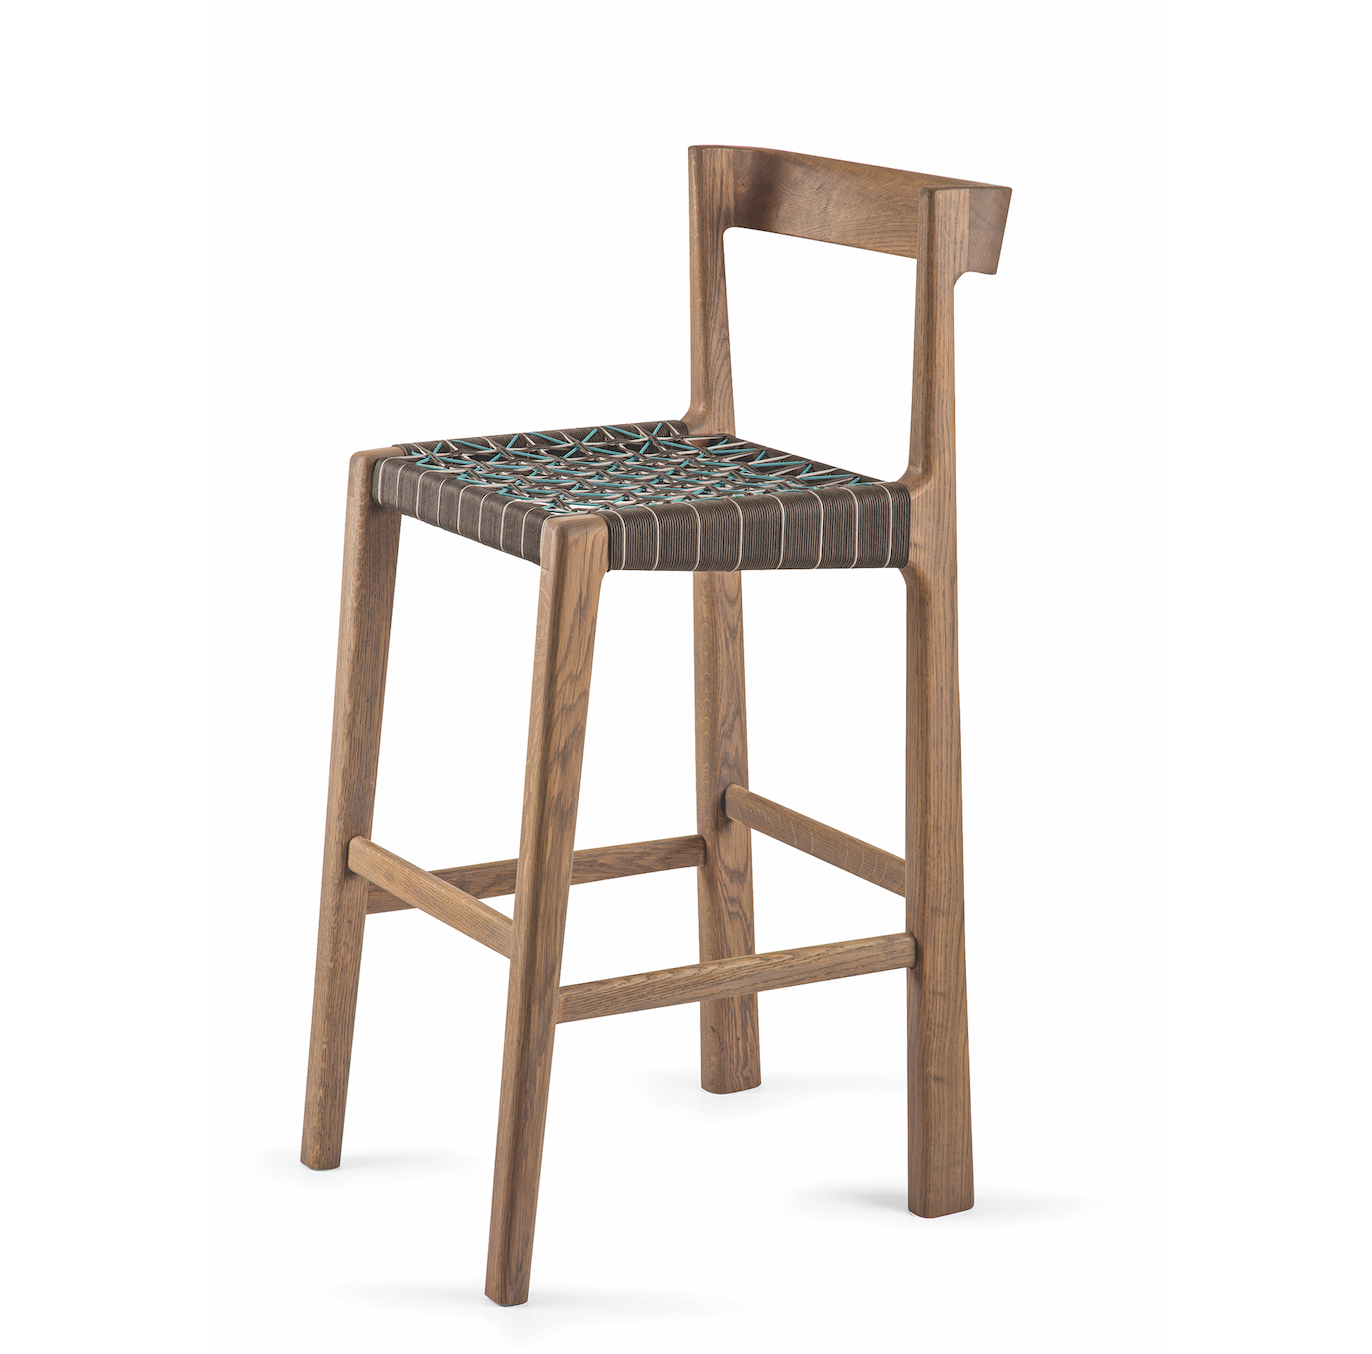 The Odi Barstool by Vogel Furniture Design. Made from a selection of timbers and finishes, it features a comfy woven base, in an assortment of patterns, weaves and colors.